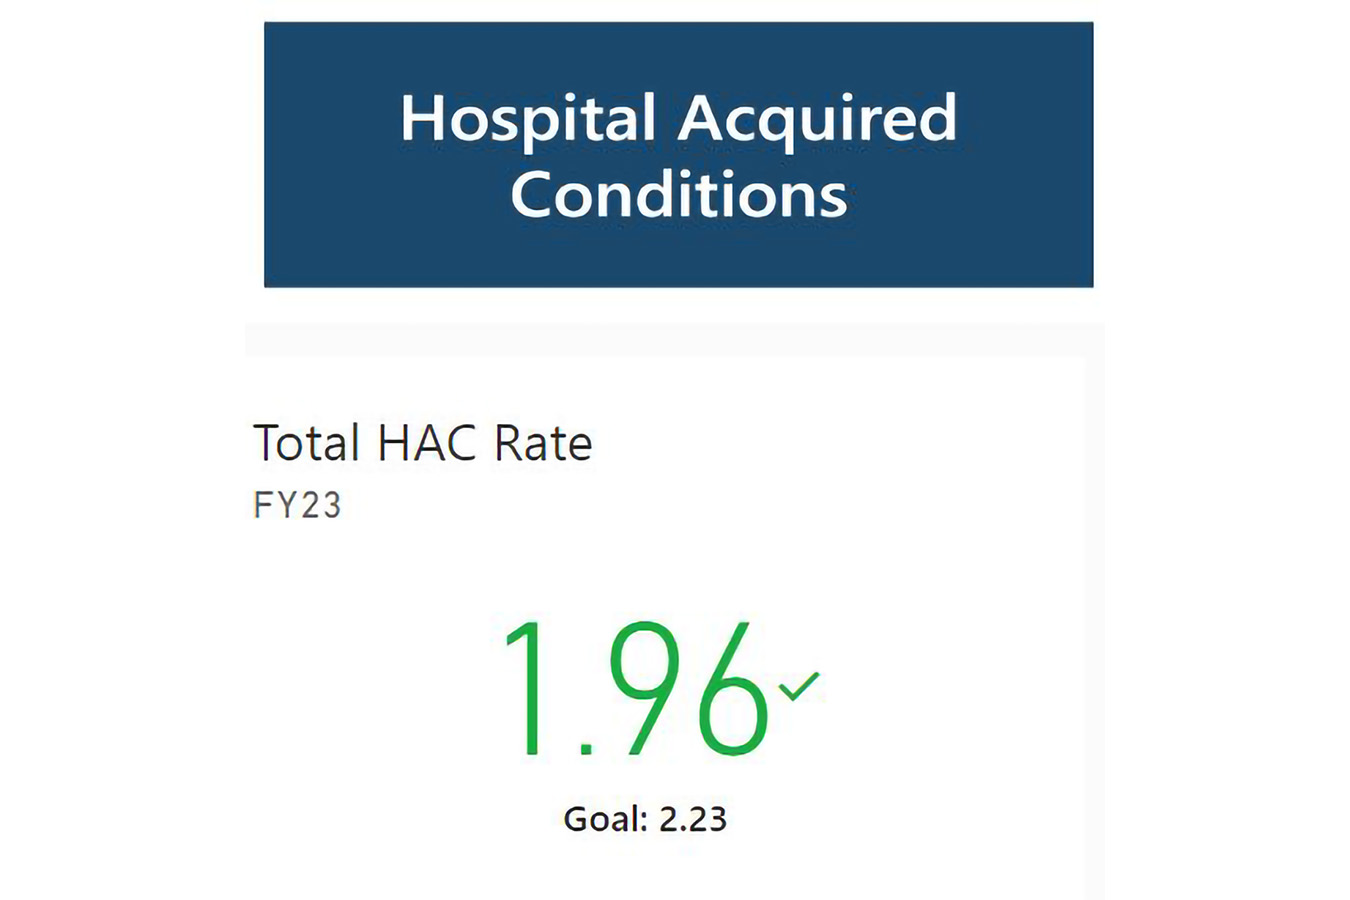 HAC rate is at 1.96%, exceeding the goal of 2.23%